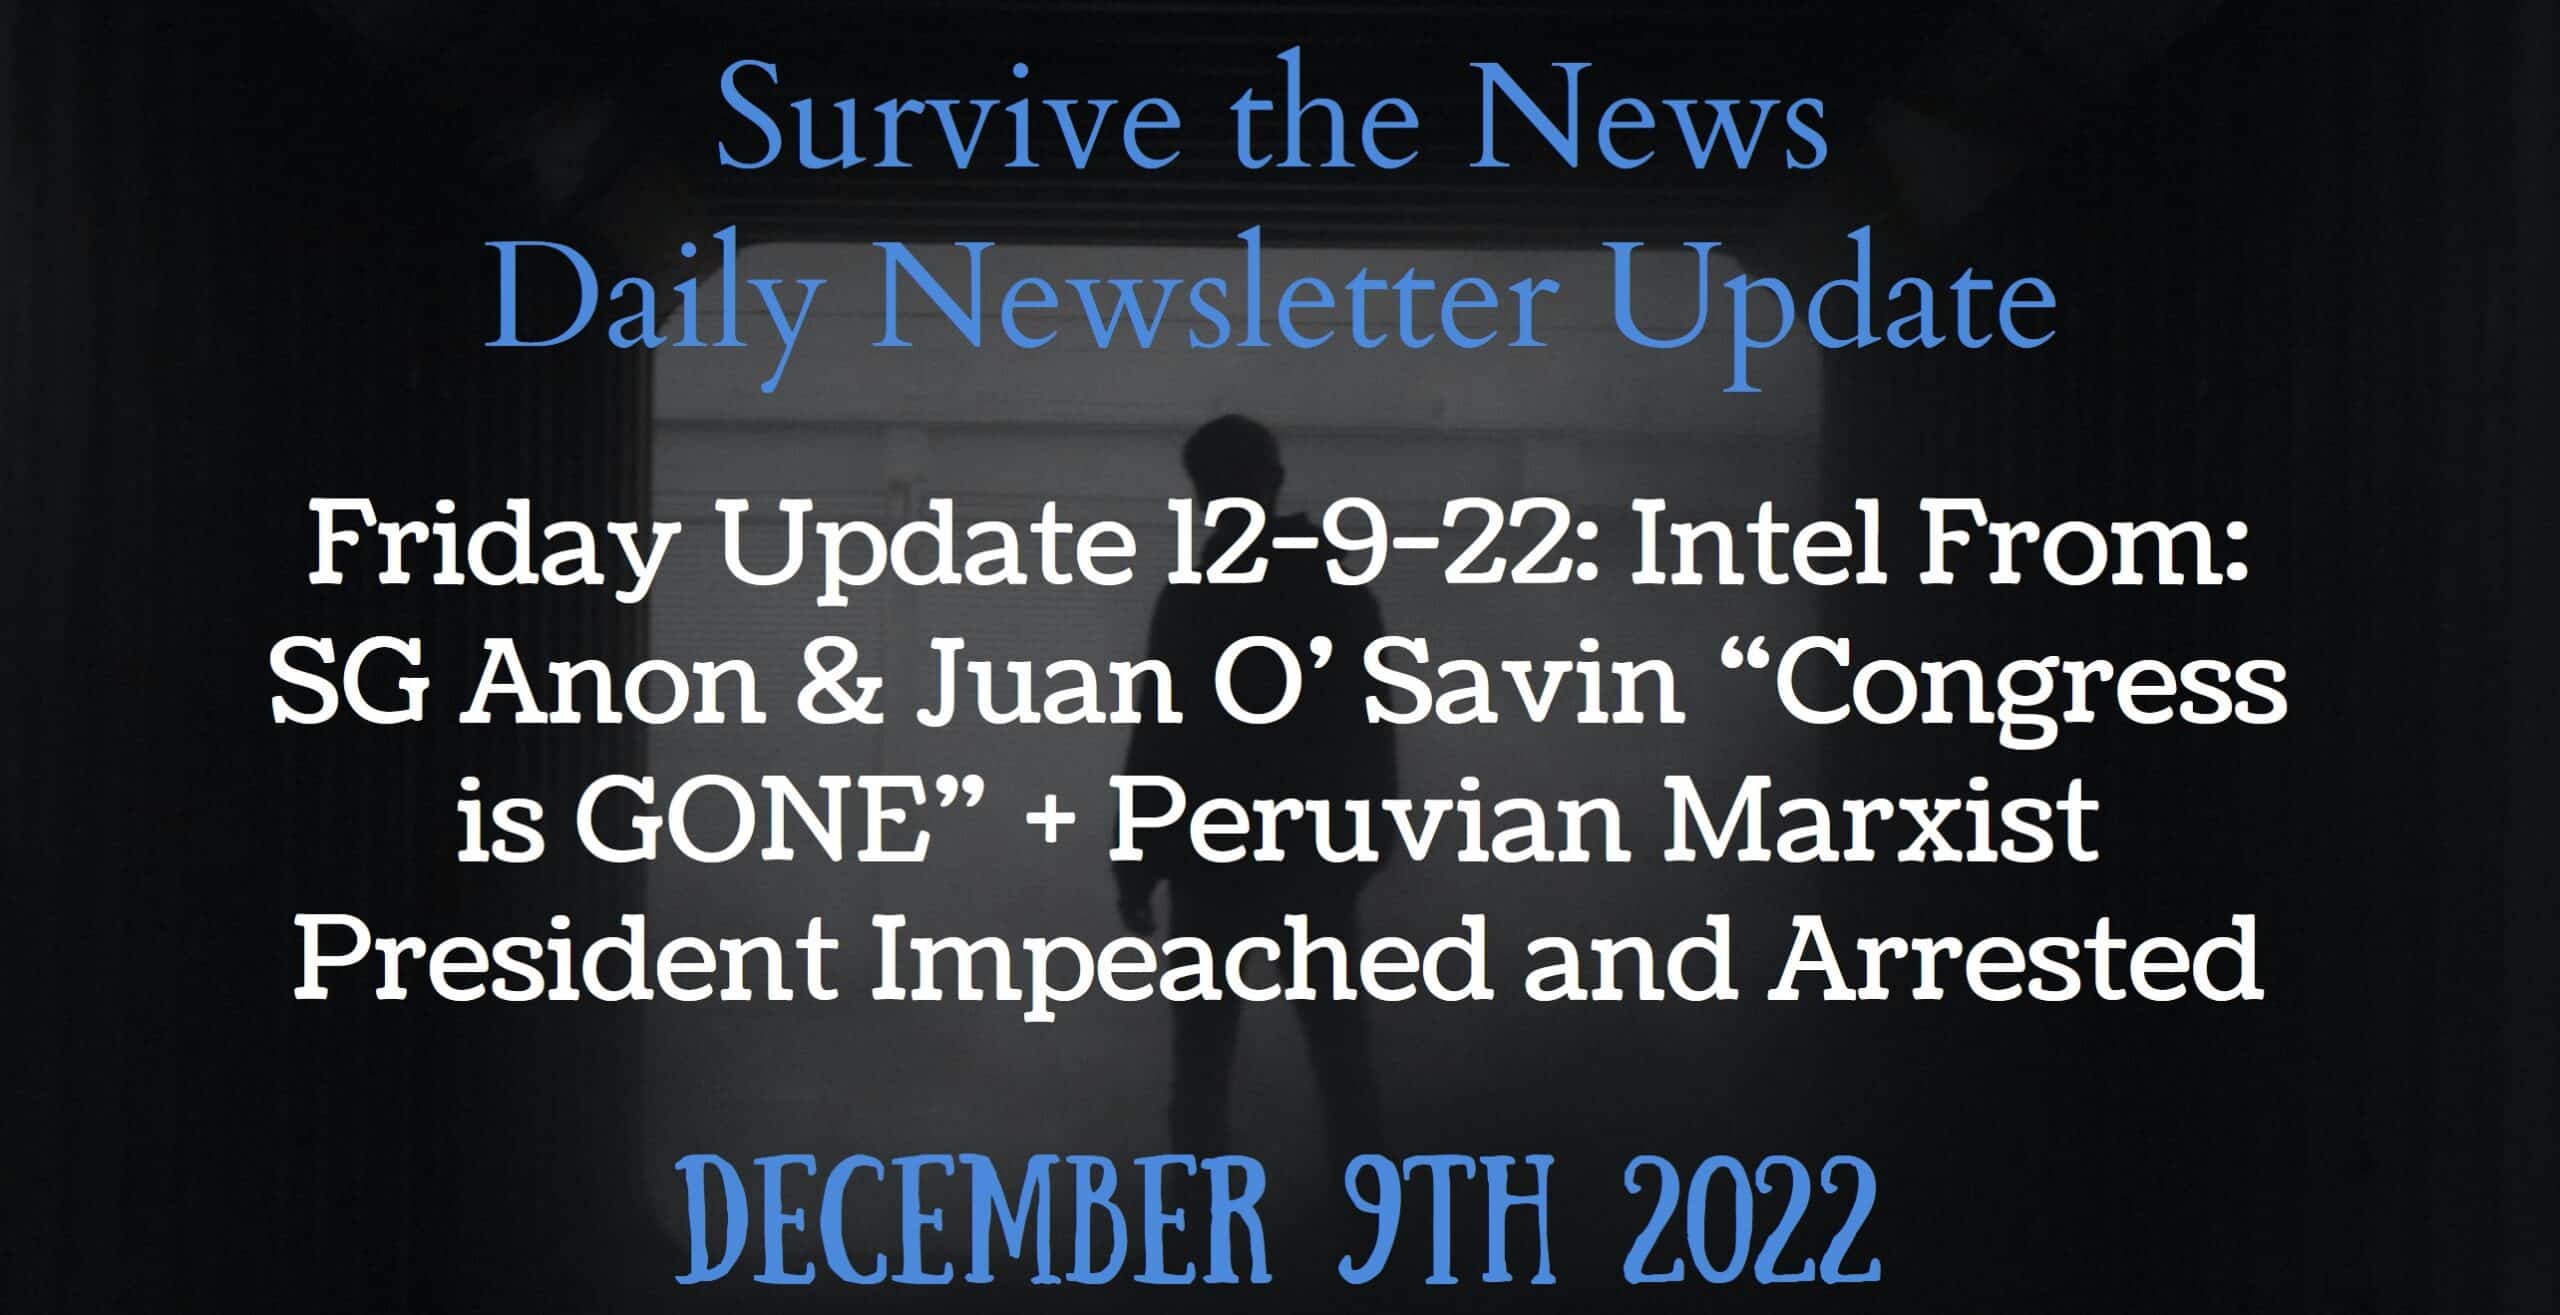 Friday Update 12-9-22: Intel From: SG Anon & Juan O’ Savin “Congress is GONE” + Peruvian Marxist President Impeached and Arrested - Survive the News